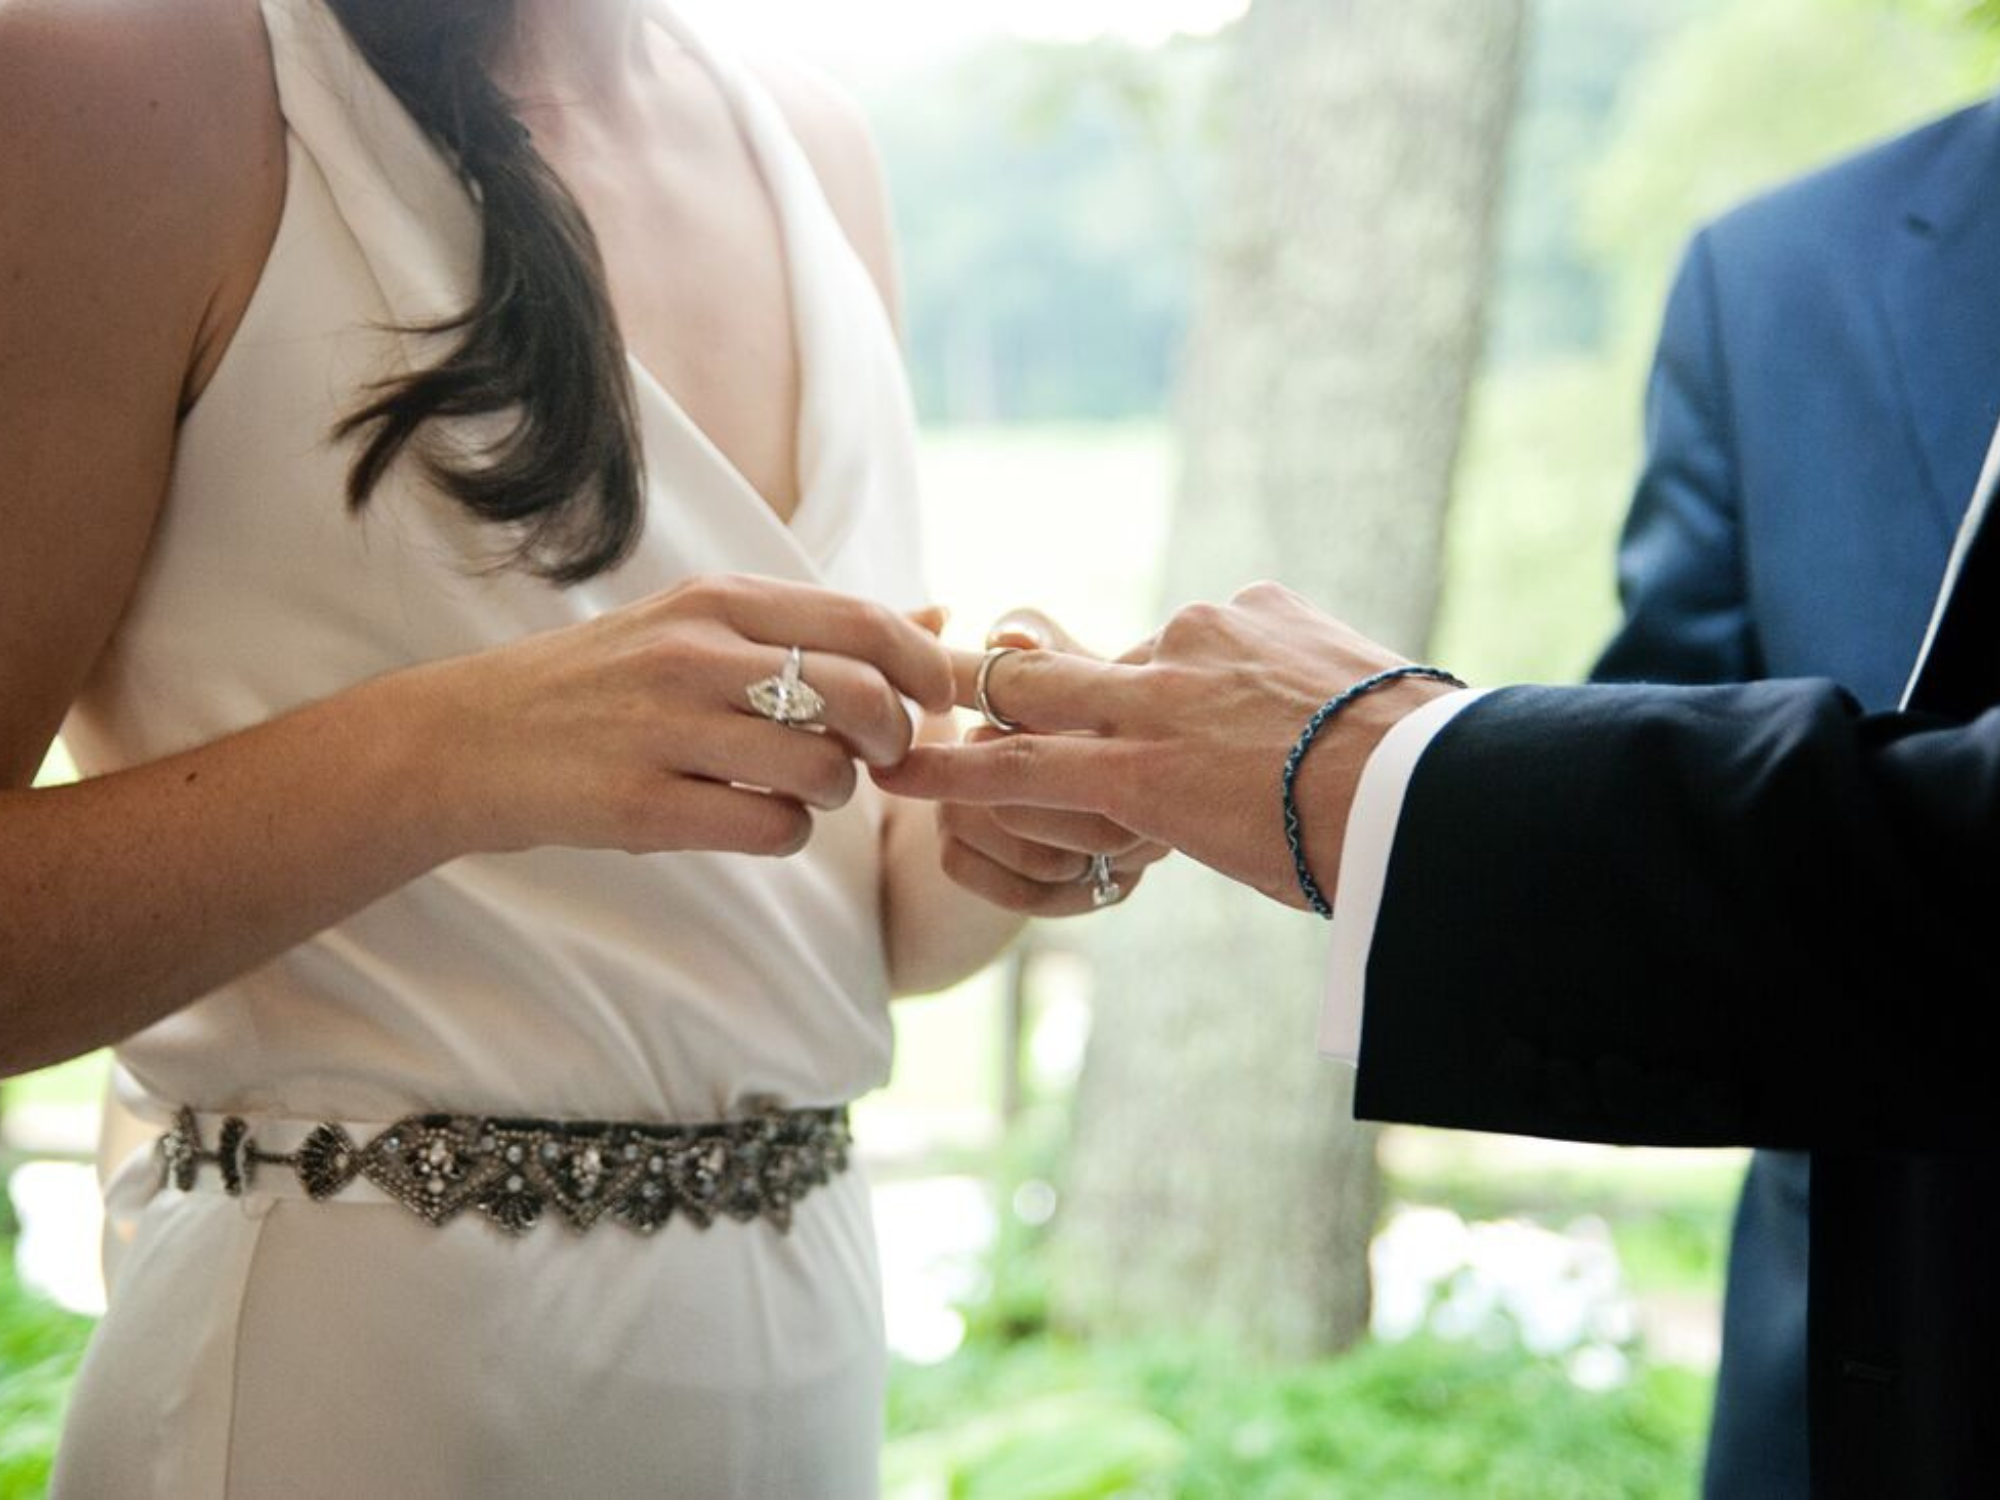 Couple exchanging rings on wedding day